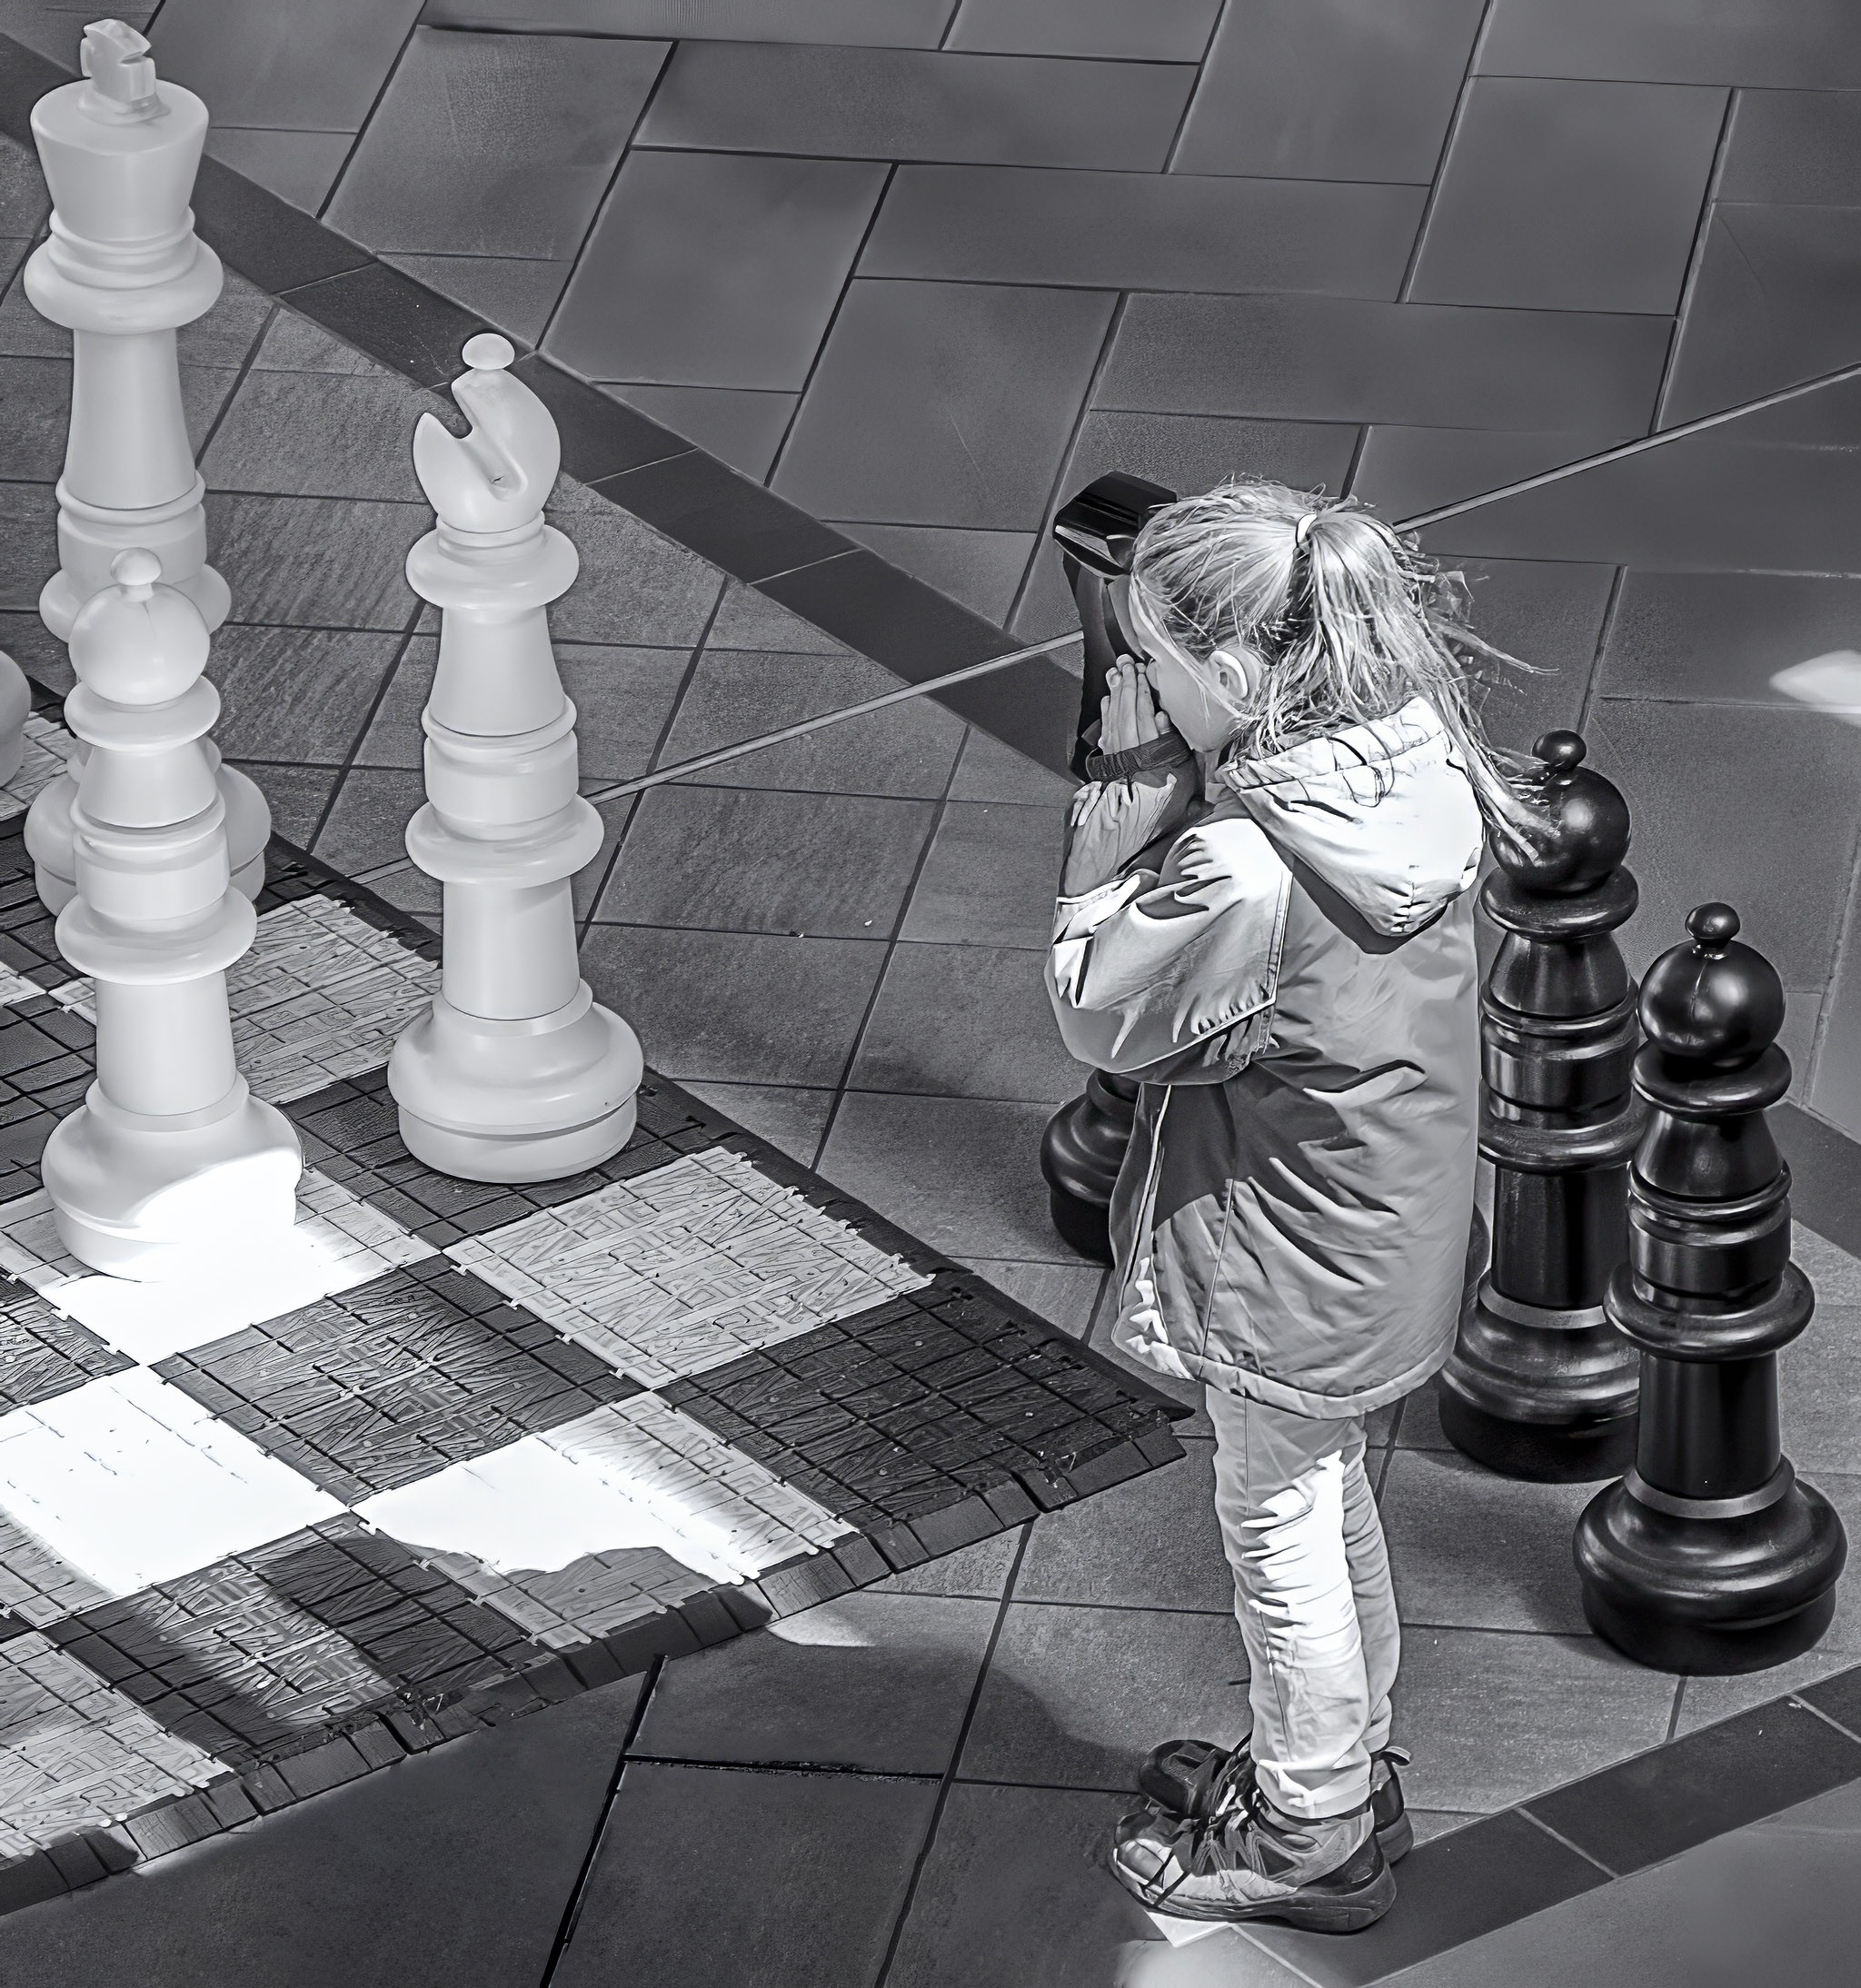 Young girl stands in front of a supersize chess board contemplating the position of the piece on the board. 